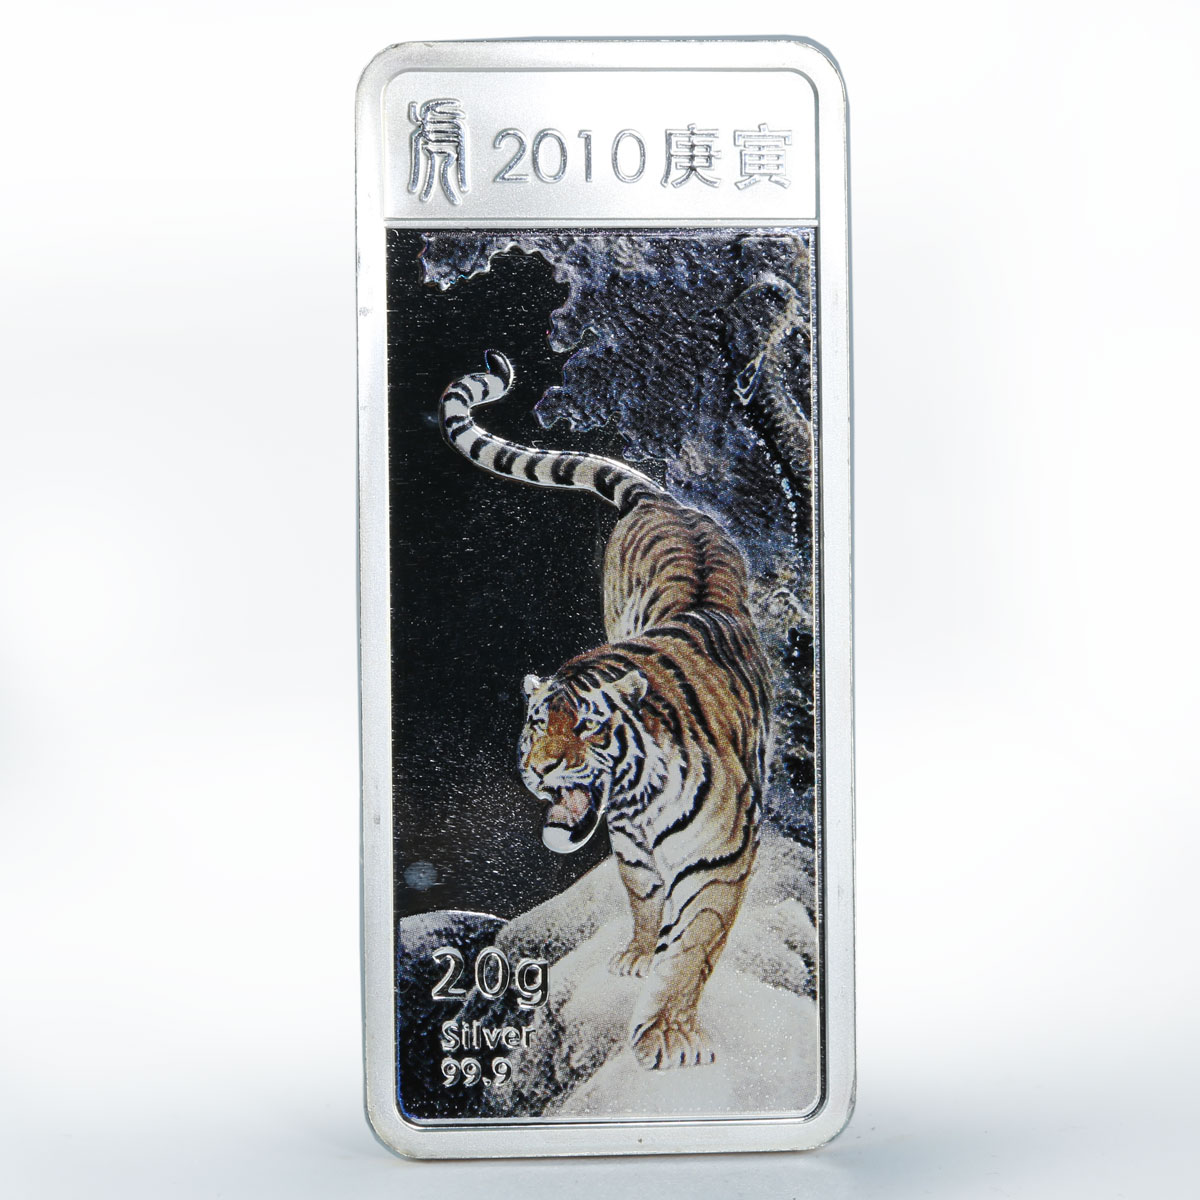 Liberia 5 dollars Year of the Tiger Lunar Rectangular colored silver coin 2010